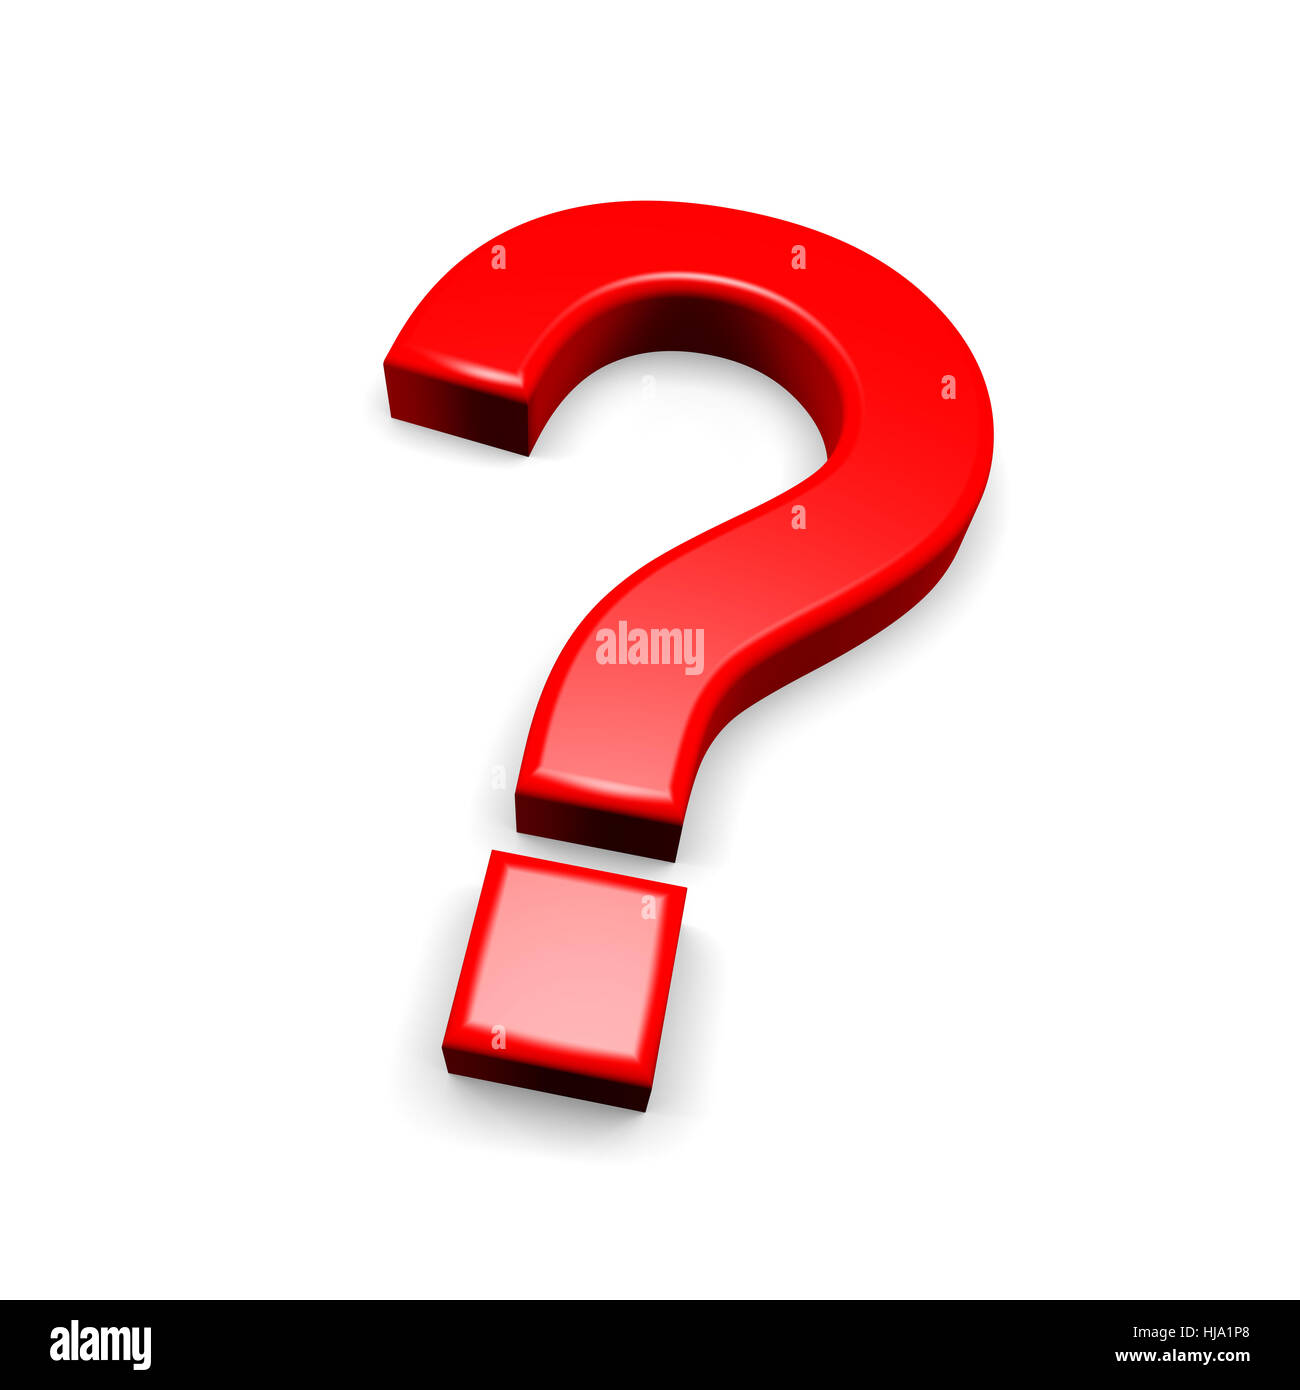 mark, query, asked, ask, question, demand, question mark, backdrop, background, Stock Photo